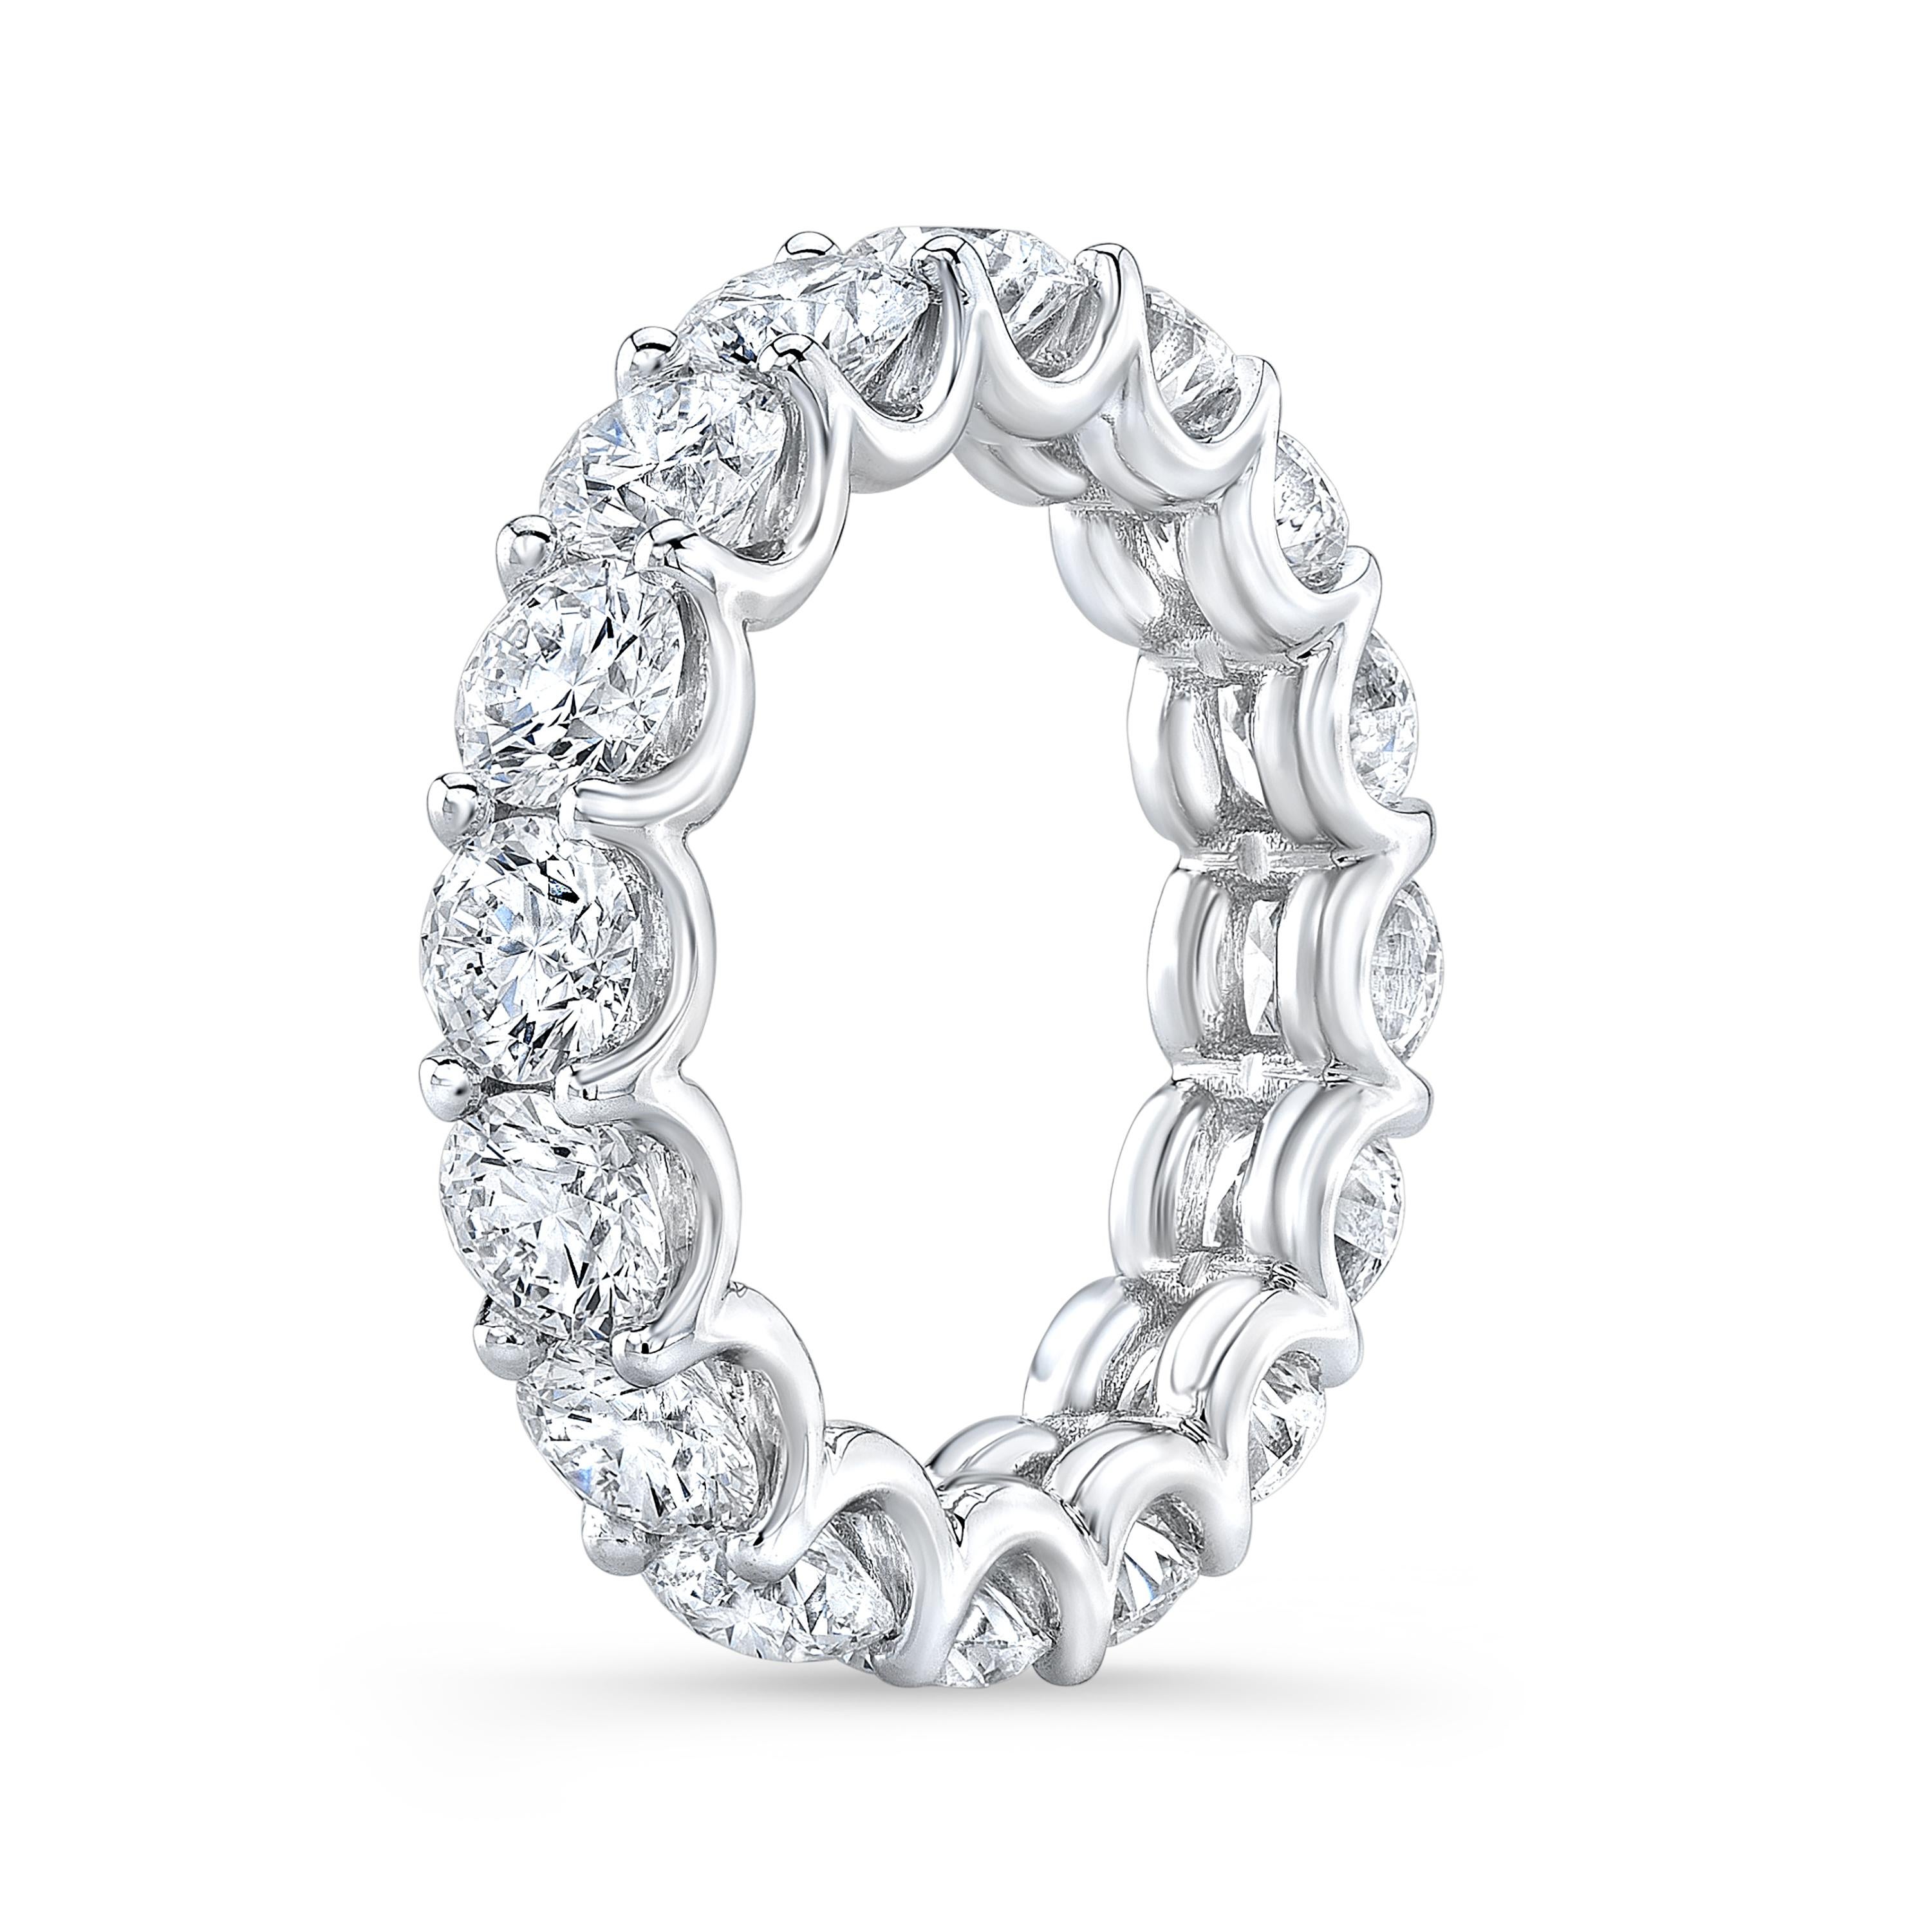 For Sale:  6 Carat Diamond Eternity Band Classic Round Cut G Color SI1 Clarity 18k Gold 8